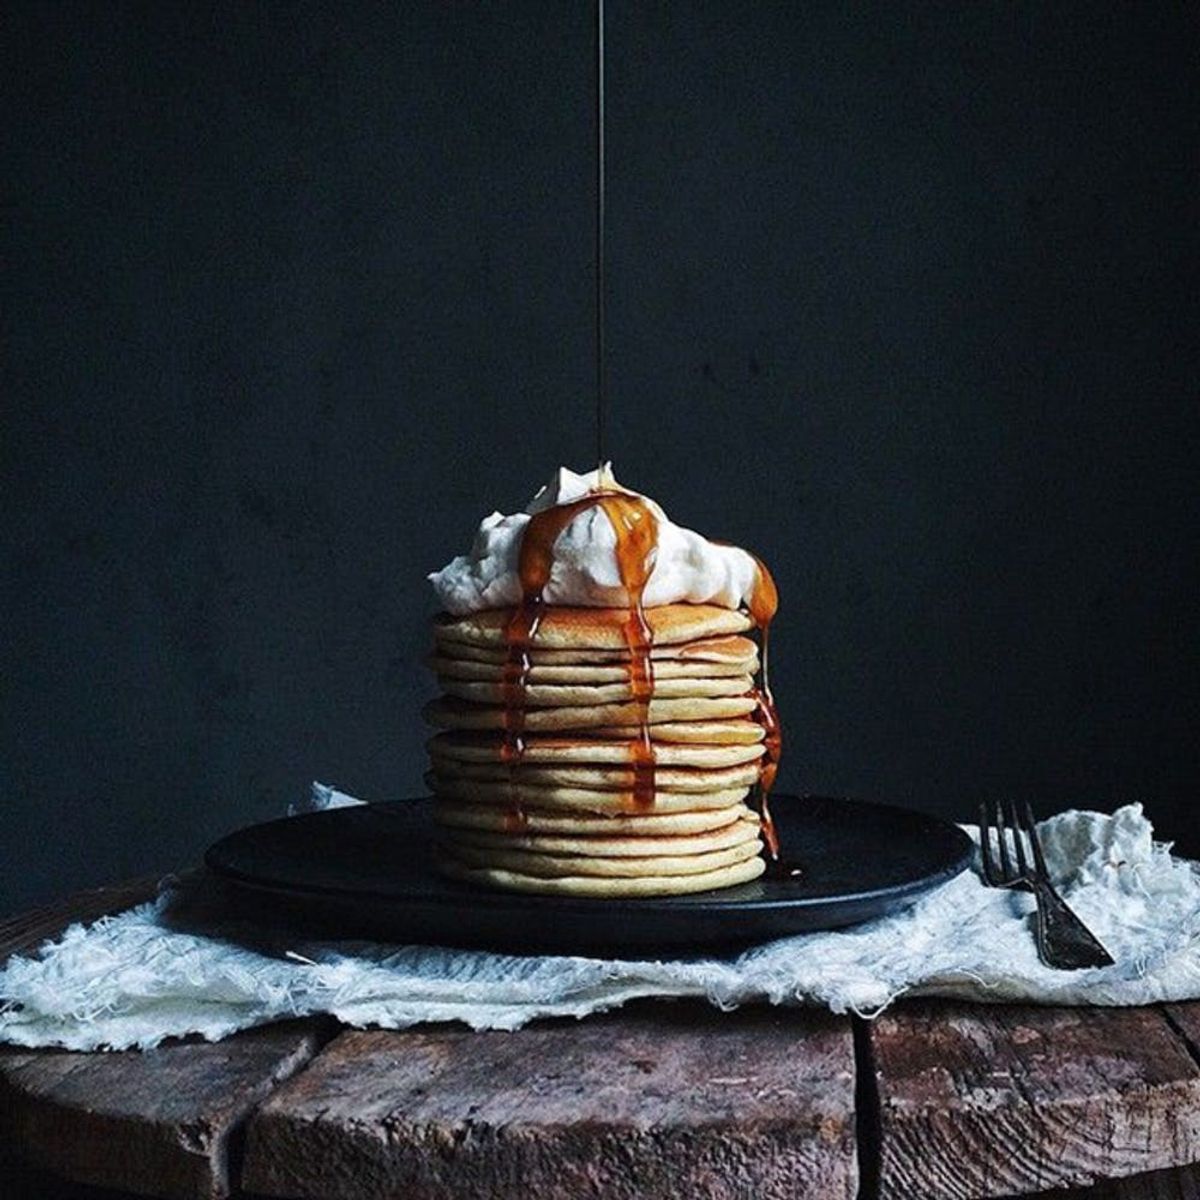 18 Food Photographers to Follow on Instagram